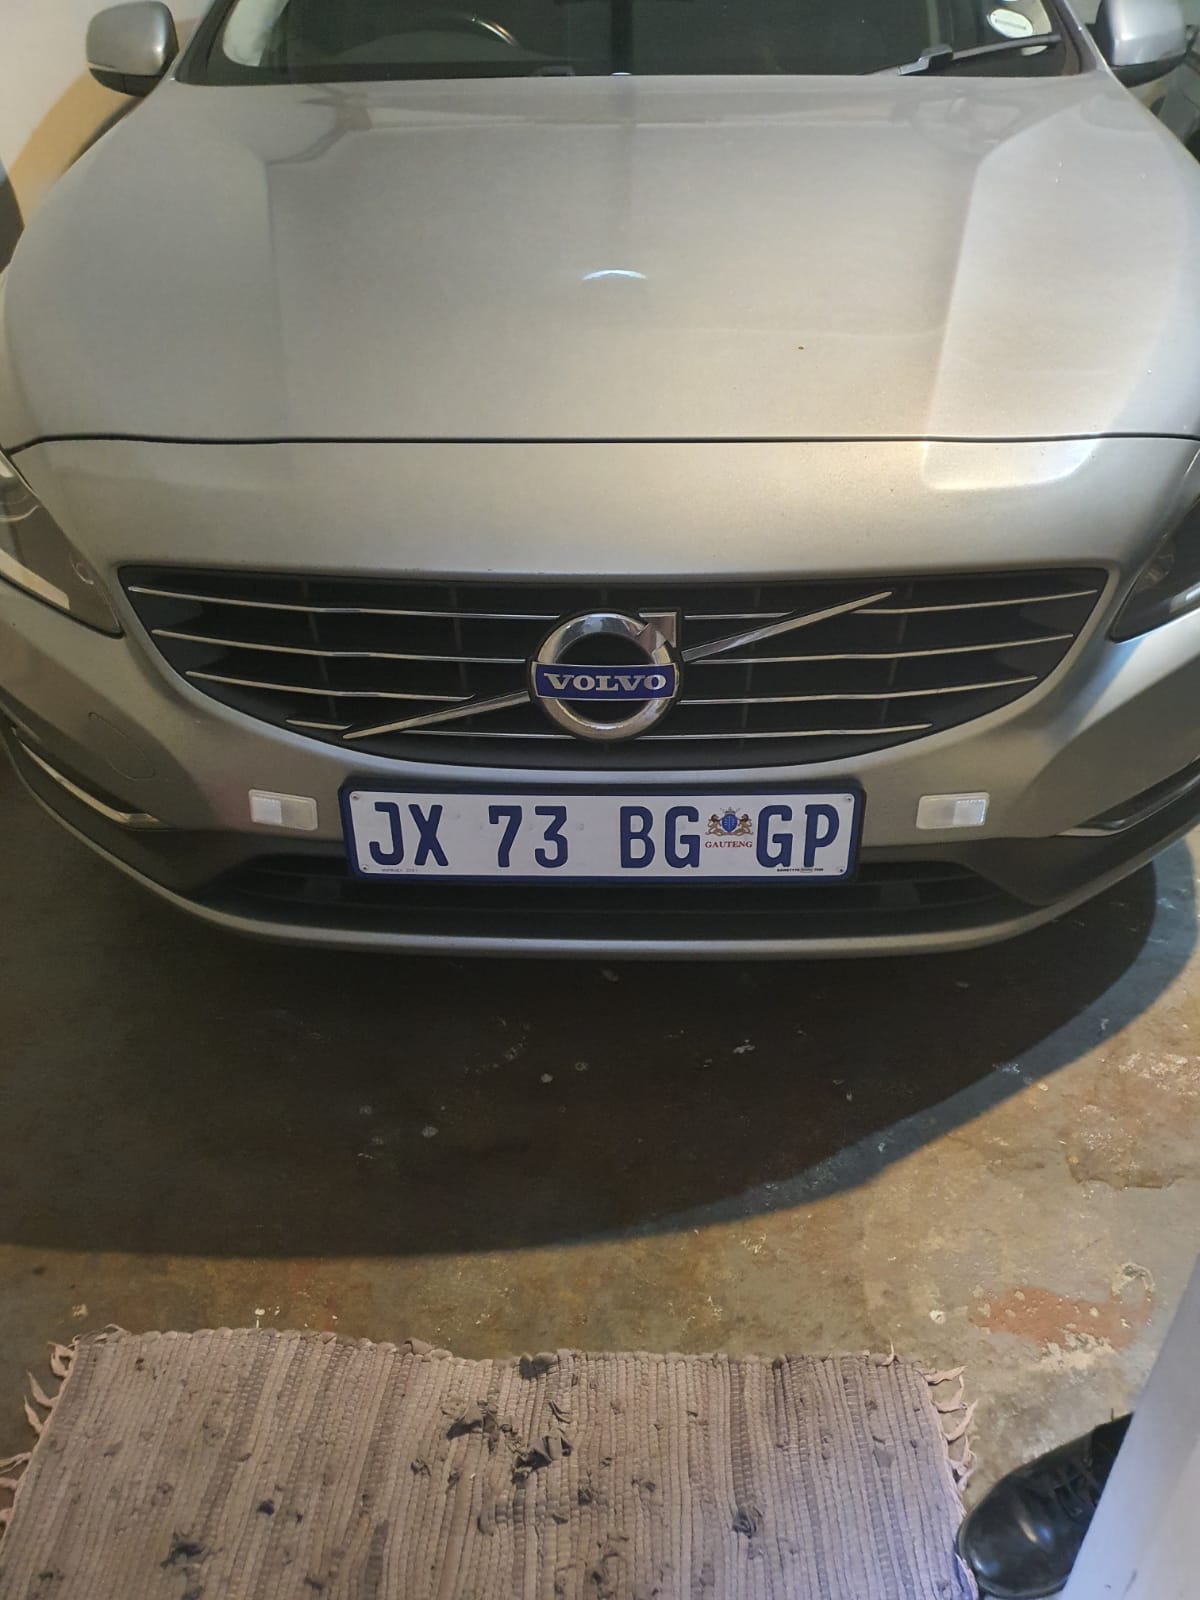 2014 volvo S60 for sale,R120 000